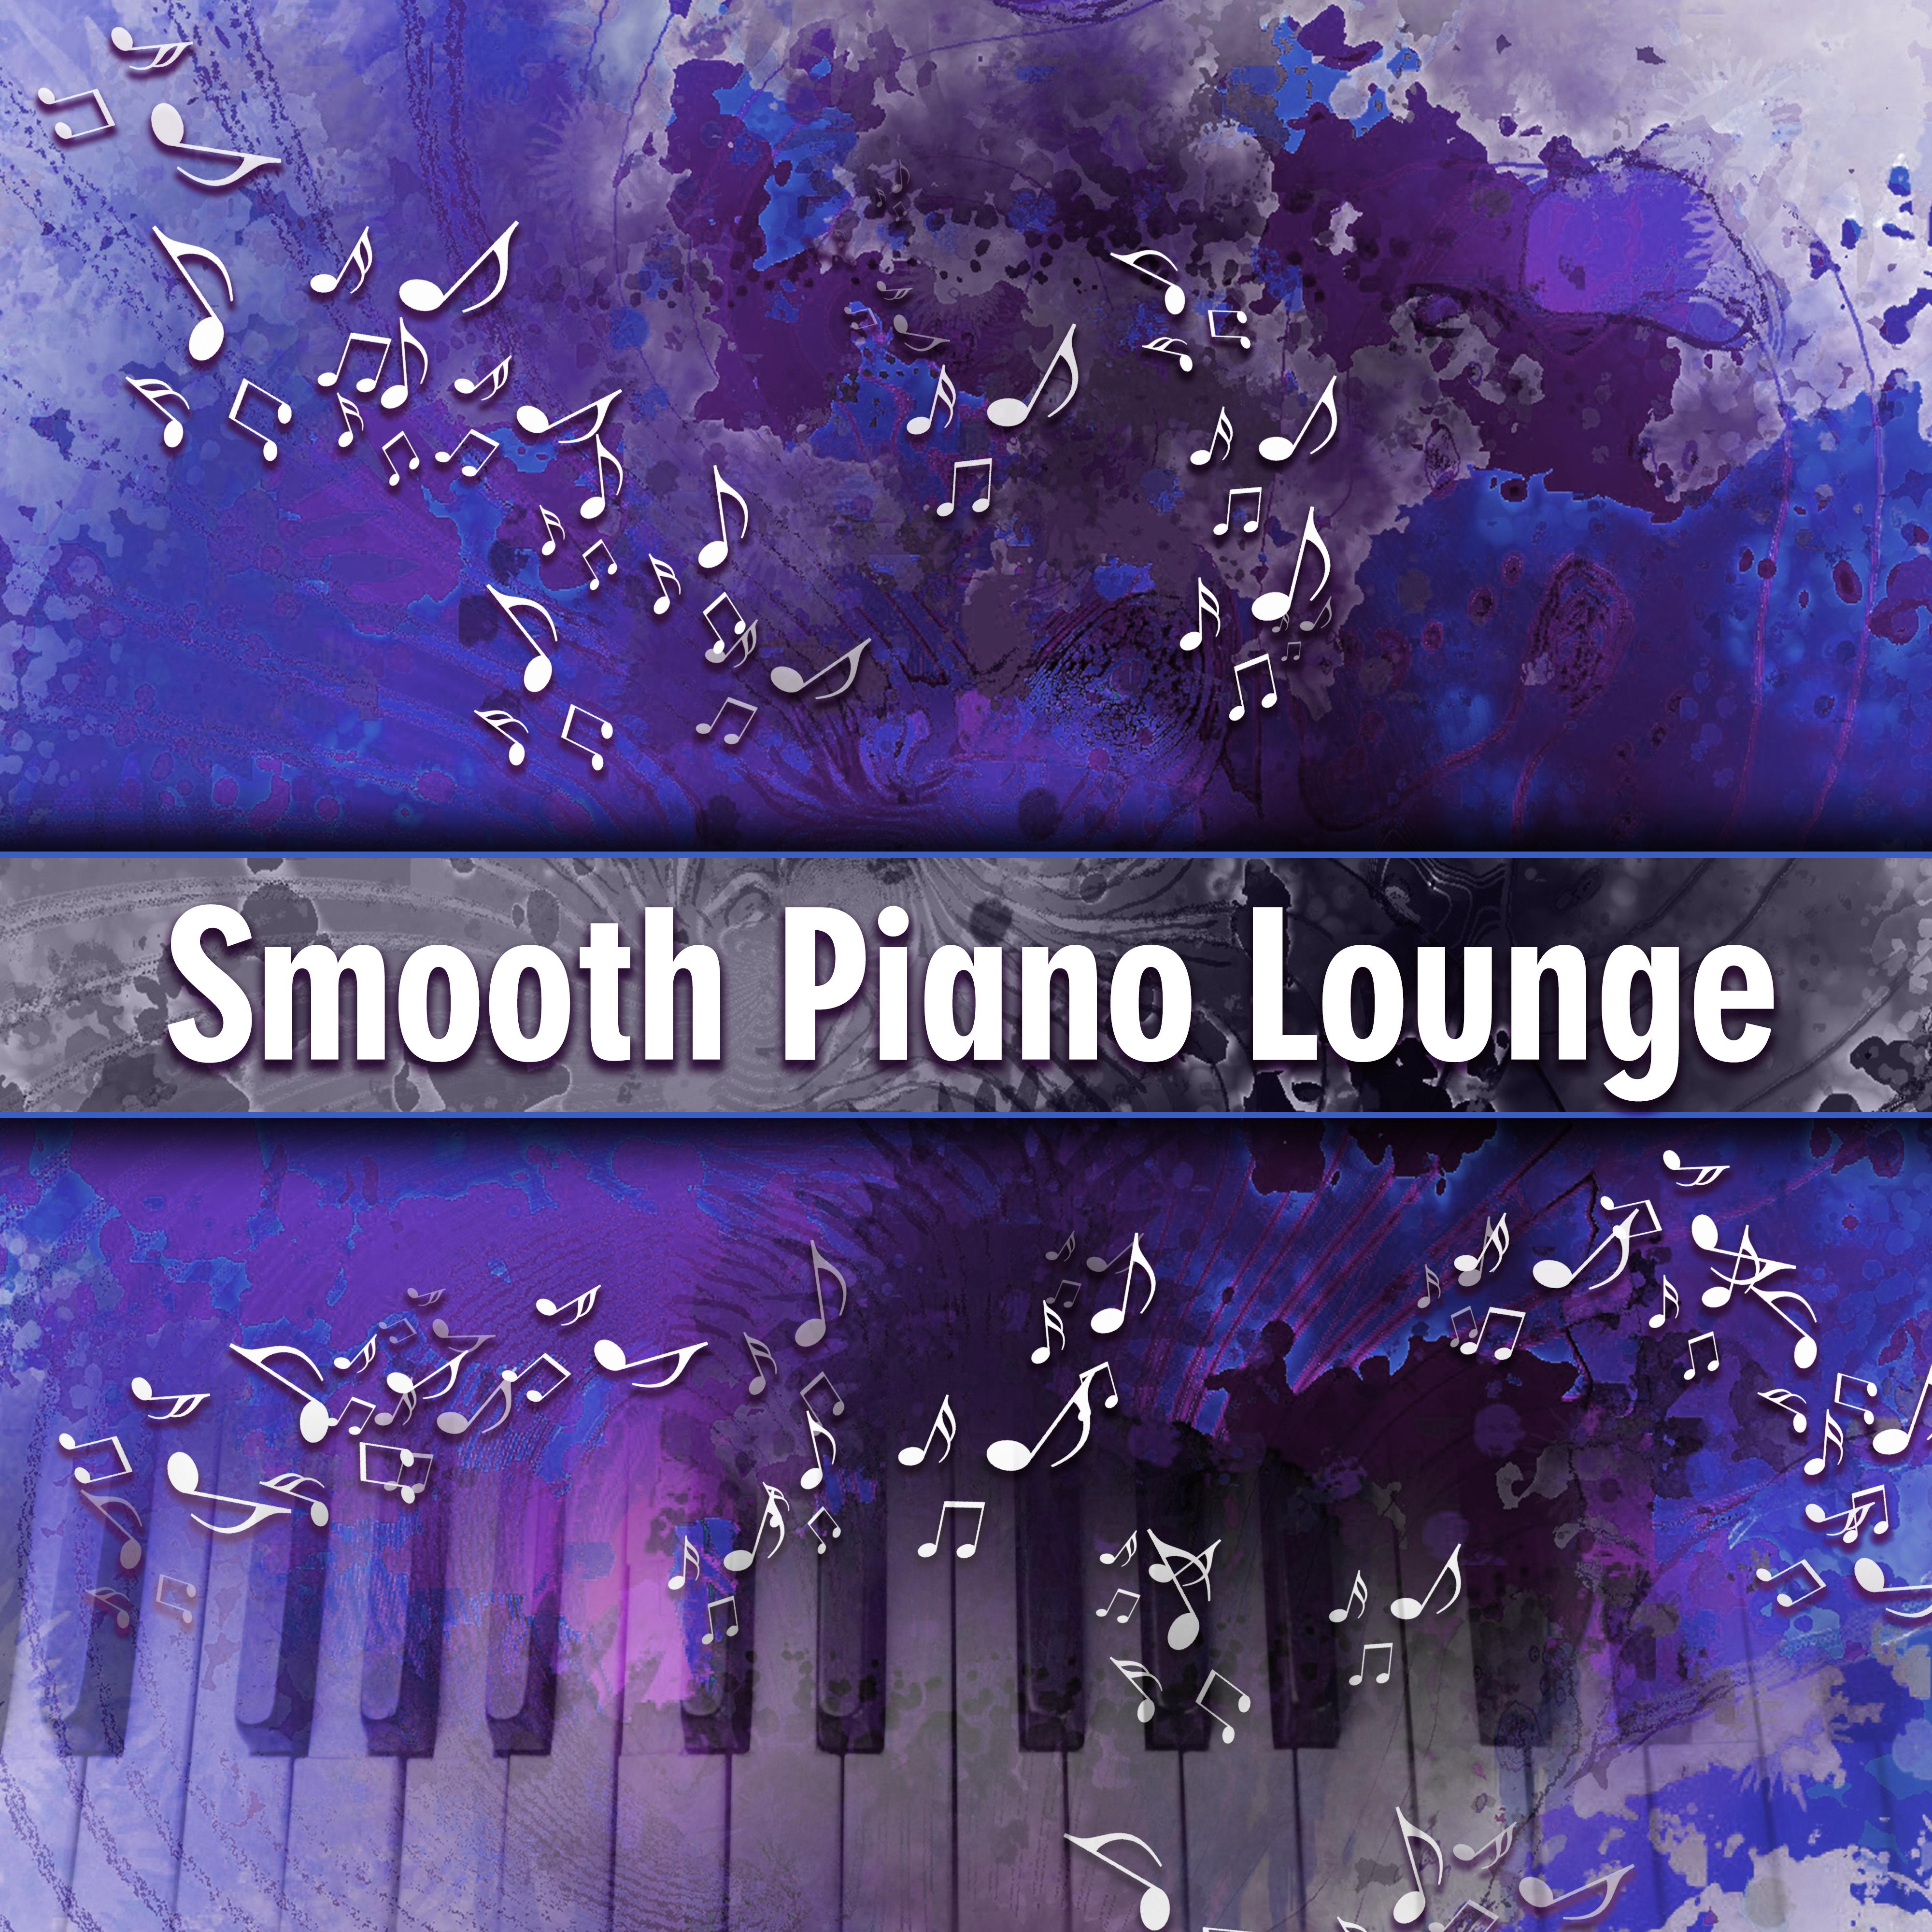 Smooth Piano Lounge  Pure Instrumental Songs, Relaxing Piano Music, Classic Jazz Lounge